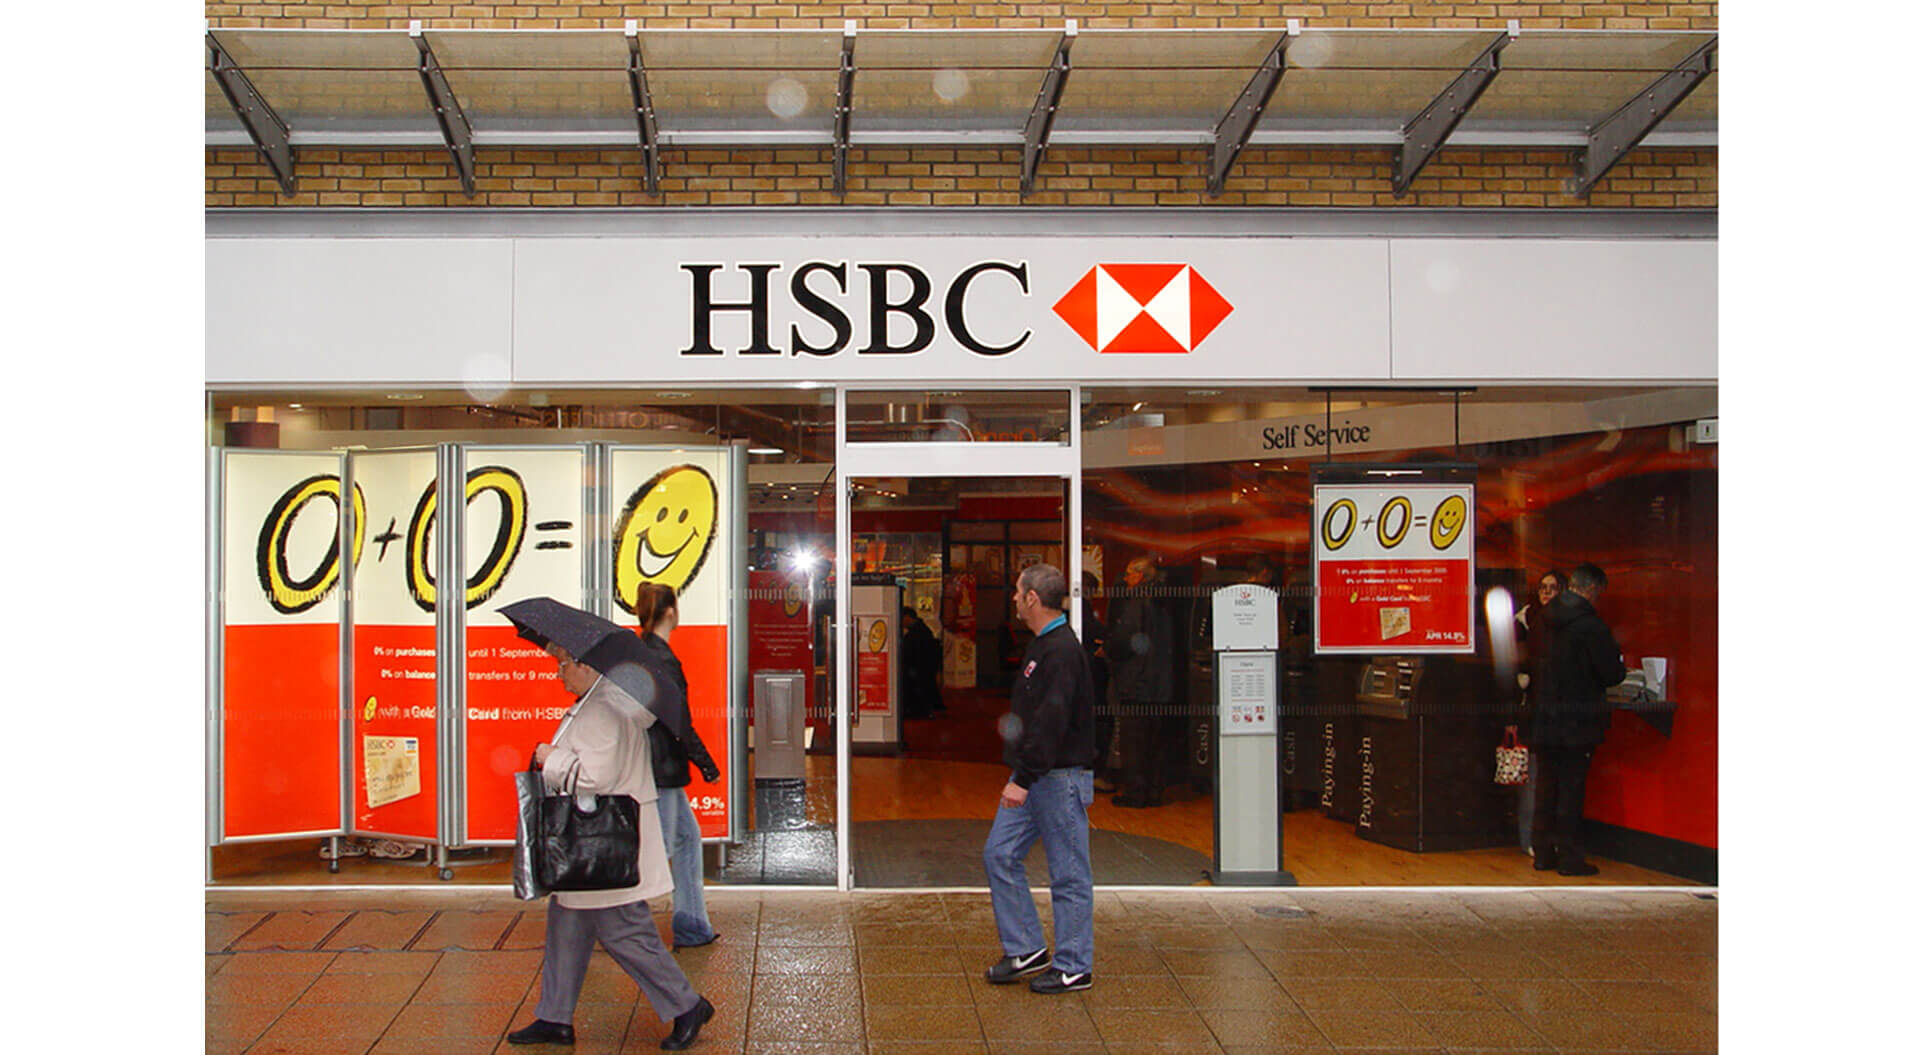 HSBC bank branch audit by brand consultant